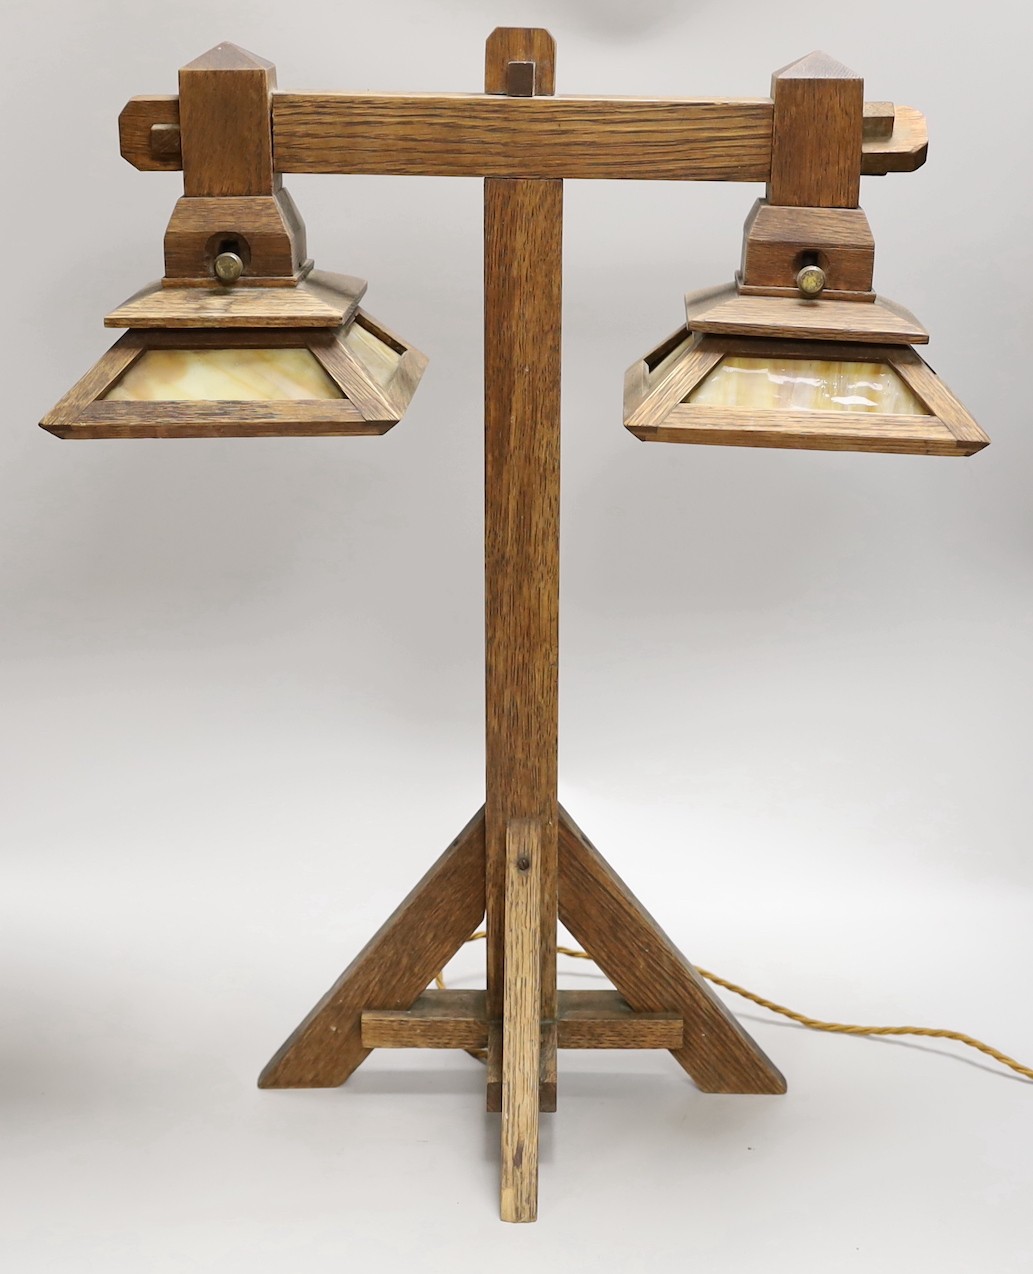 An oak mission-style lamp, 23cms high x 46cms wide